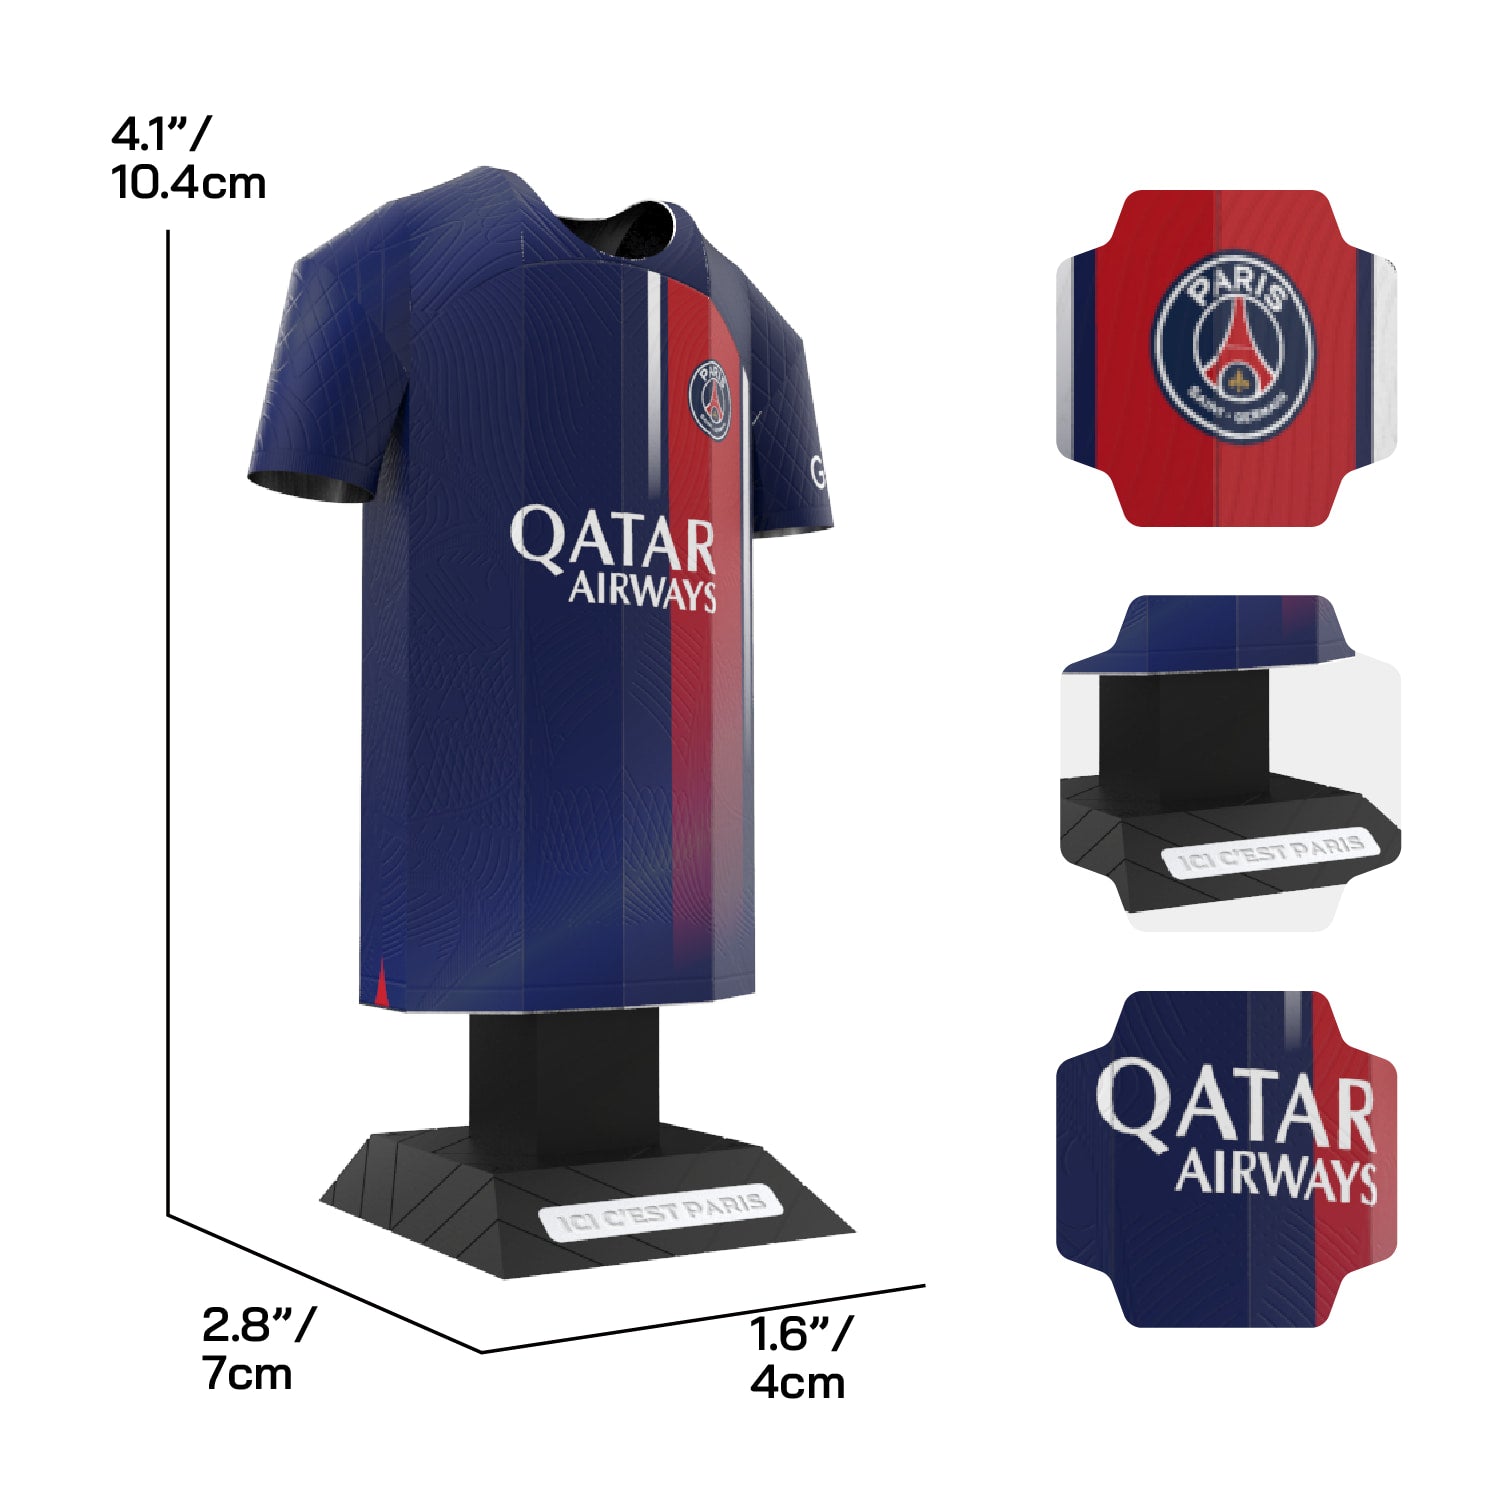 PSG Home Jersey dimensions